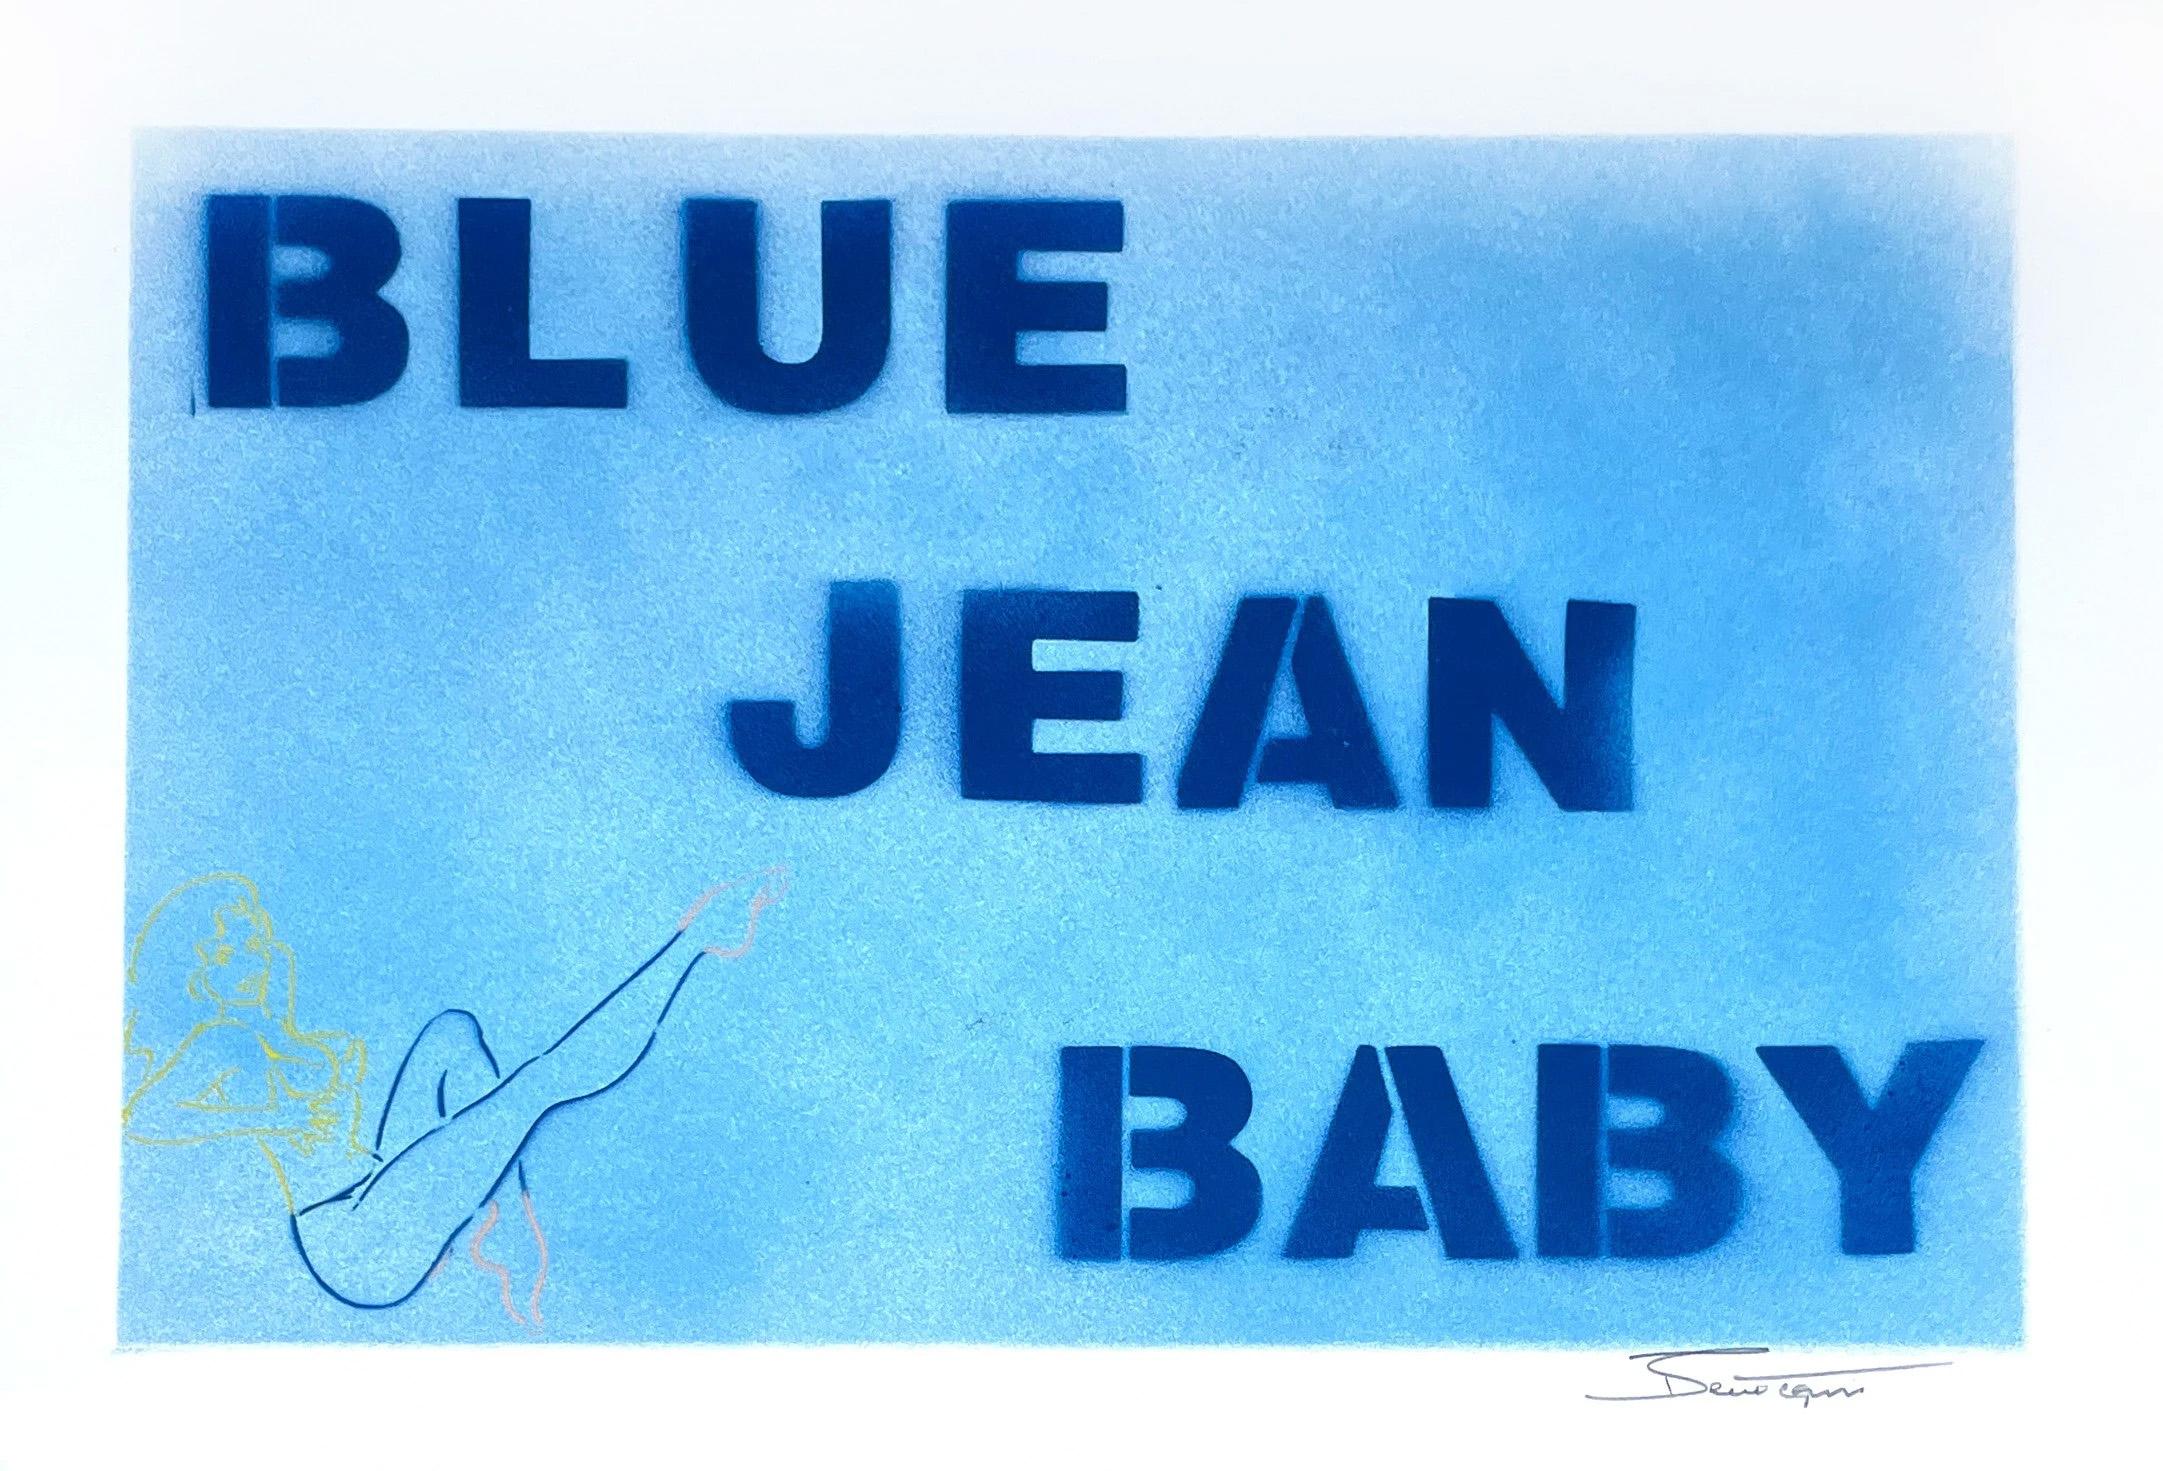 MEDIUM: ​Mixed Media on Paper
IMAGE SIZE: 22" x 30"

ABOUT THE IMAGE: Drawing inspiration from the song "Tiny Dancer," and its reference to "Blue Jean Baby" this piece beautifully showcases Bernie Taupin's artistic talents.